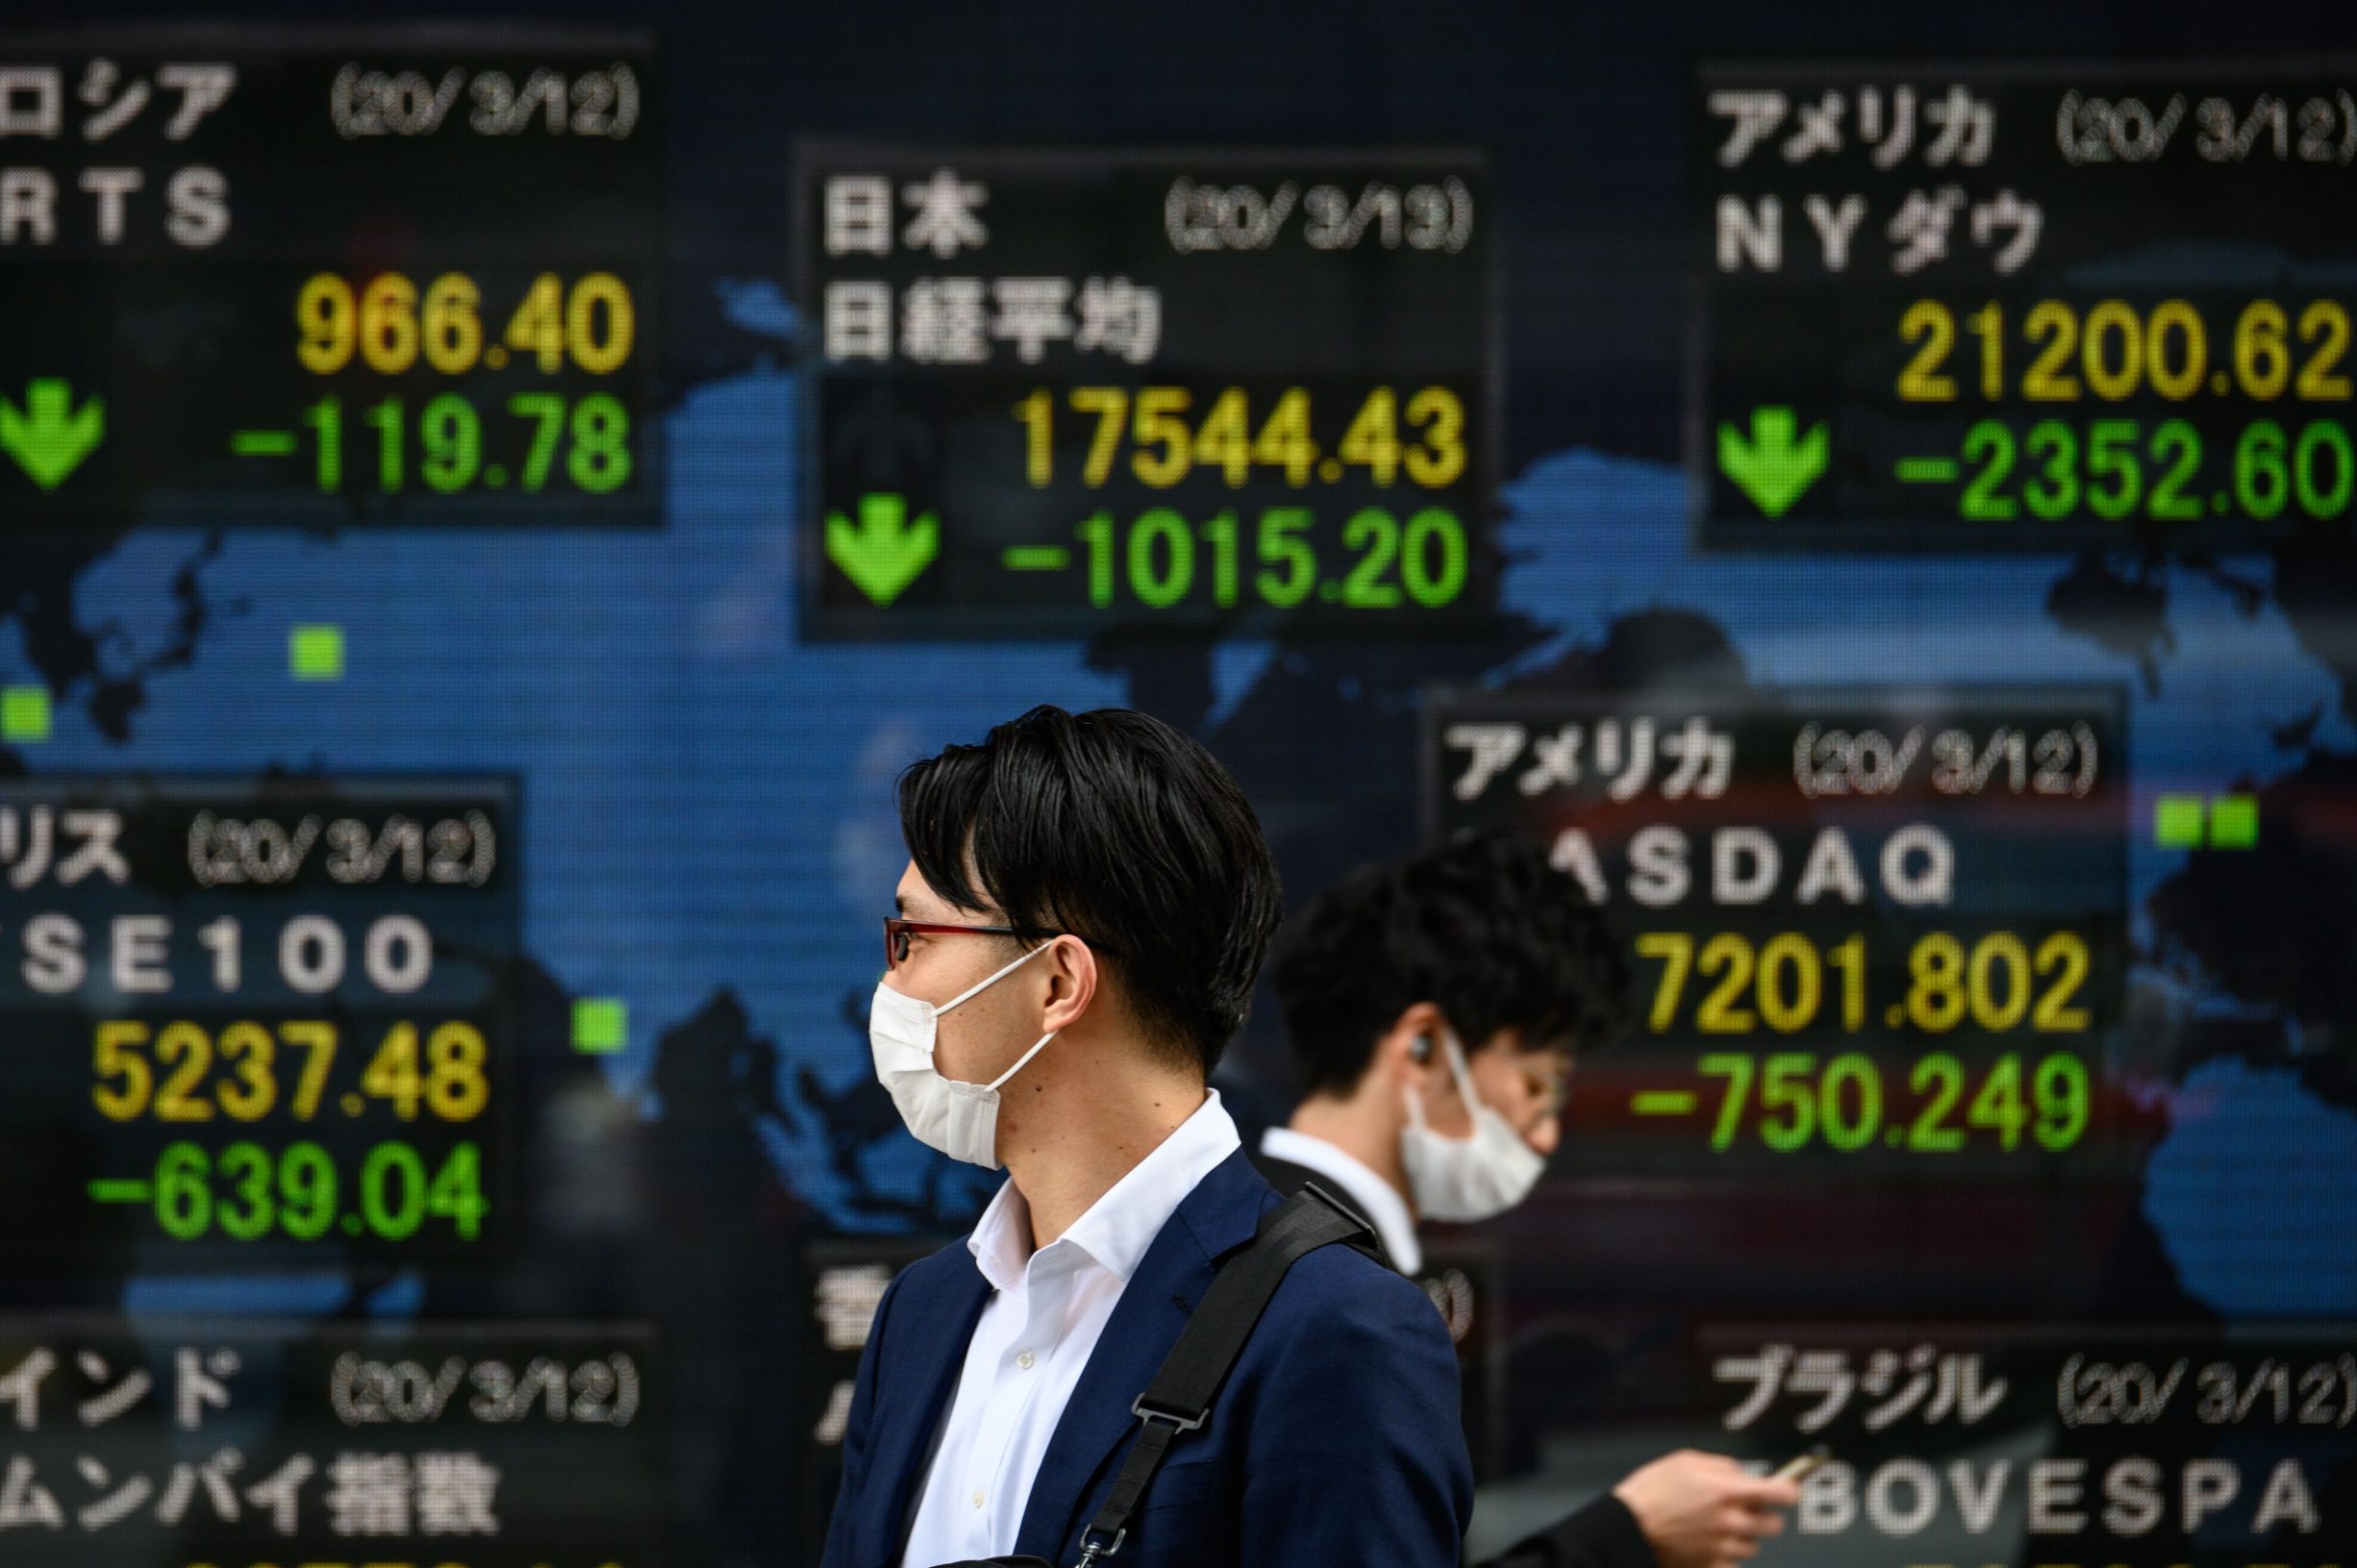 Pedestrians wearing face masks walk past an electric board showing Nikkei 225 index (C) in Tokyo on March 13, 2020. - Tokyo's benchmark Nikkei index fell more than six percent, trimming losses following a global rout on fears of a recession linked to the coronavirus outbreak. (Photo by Philip FONG / AFP)